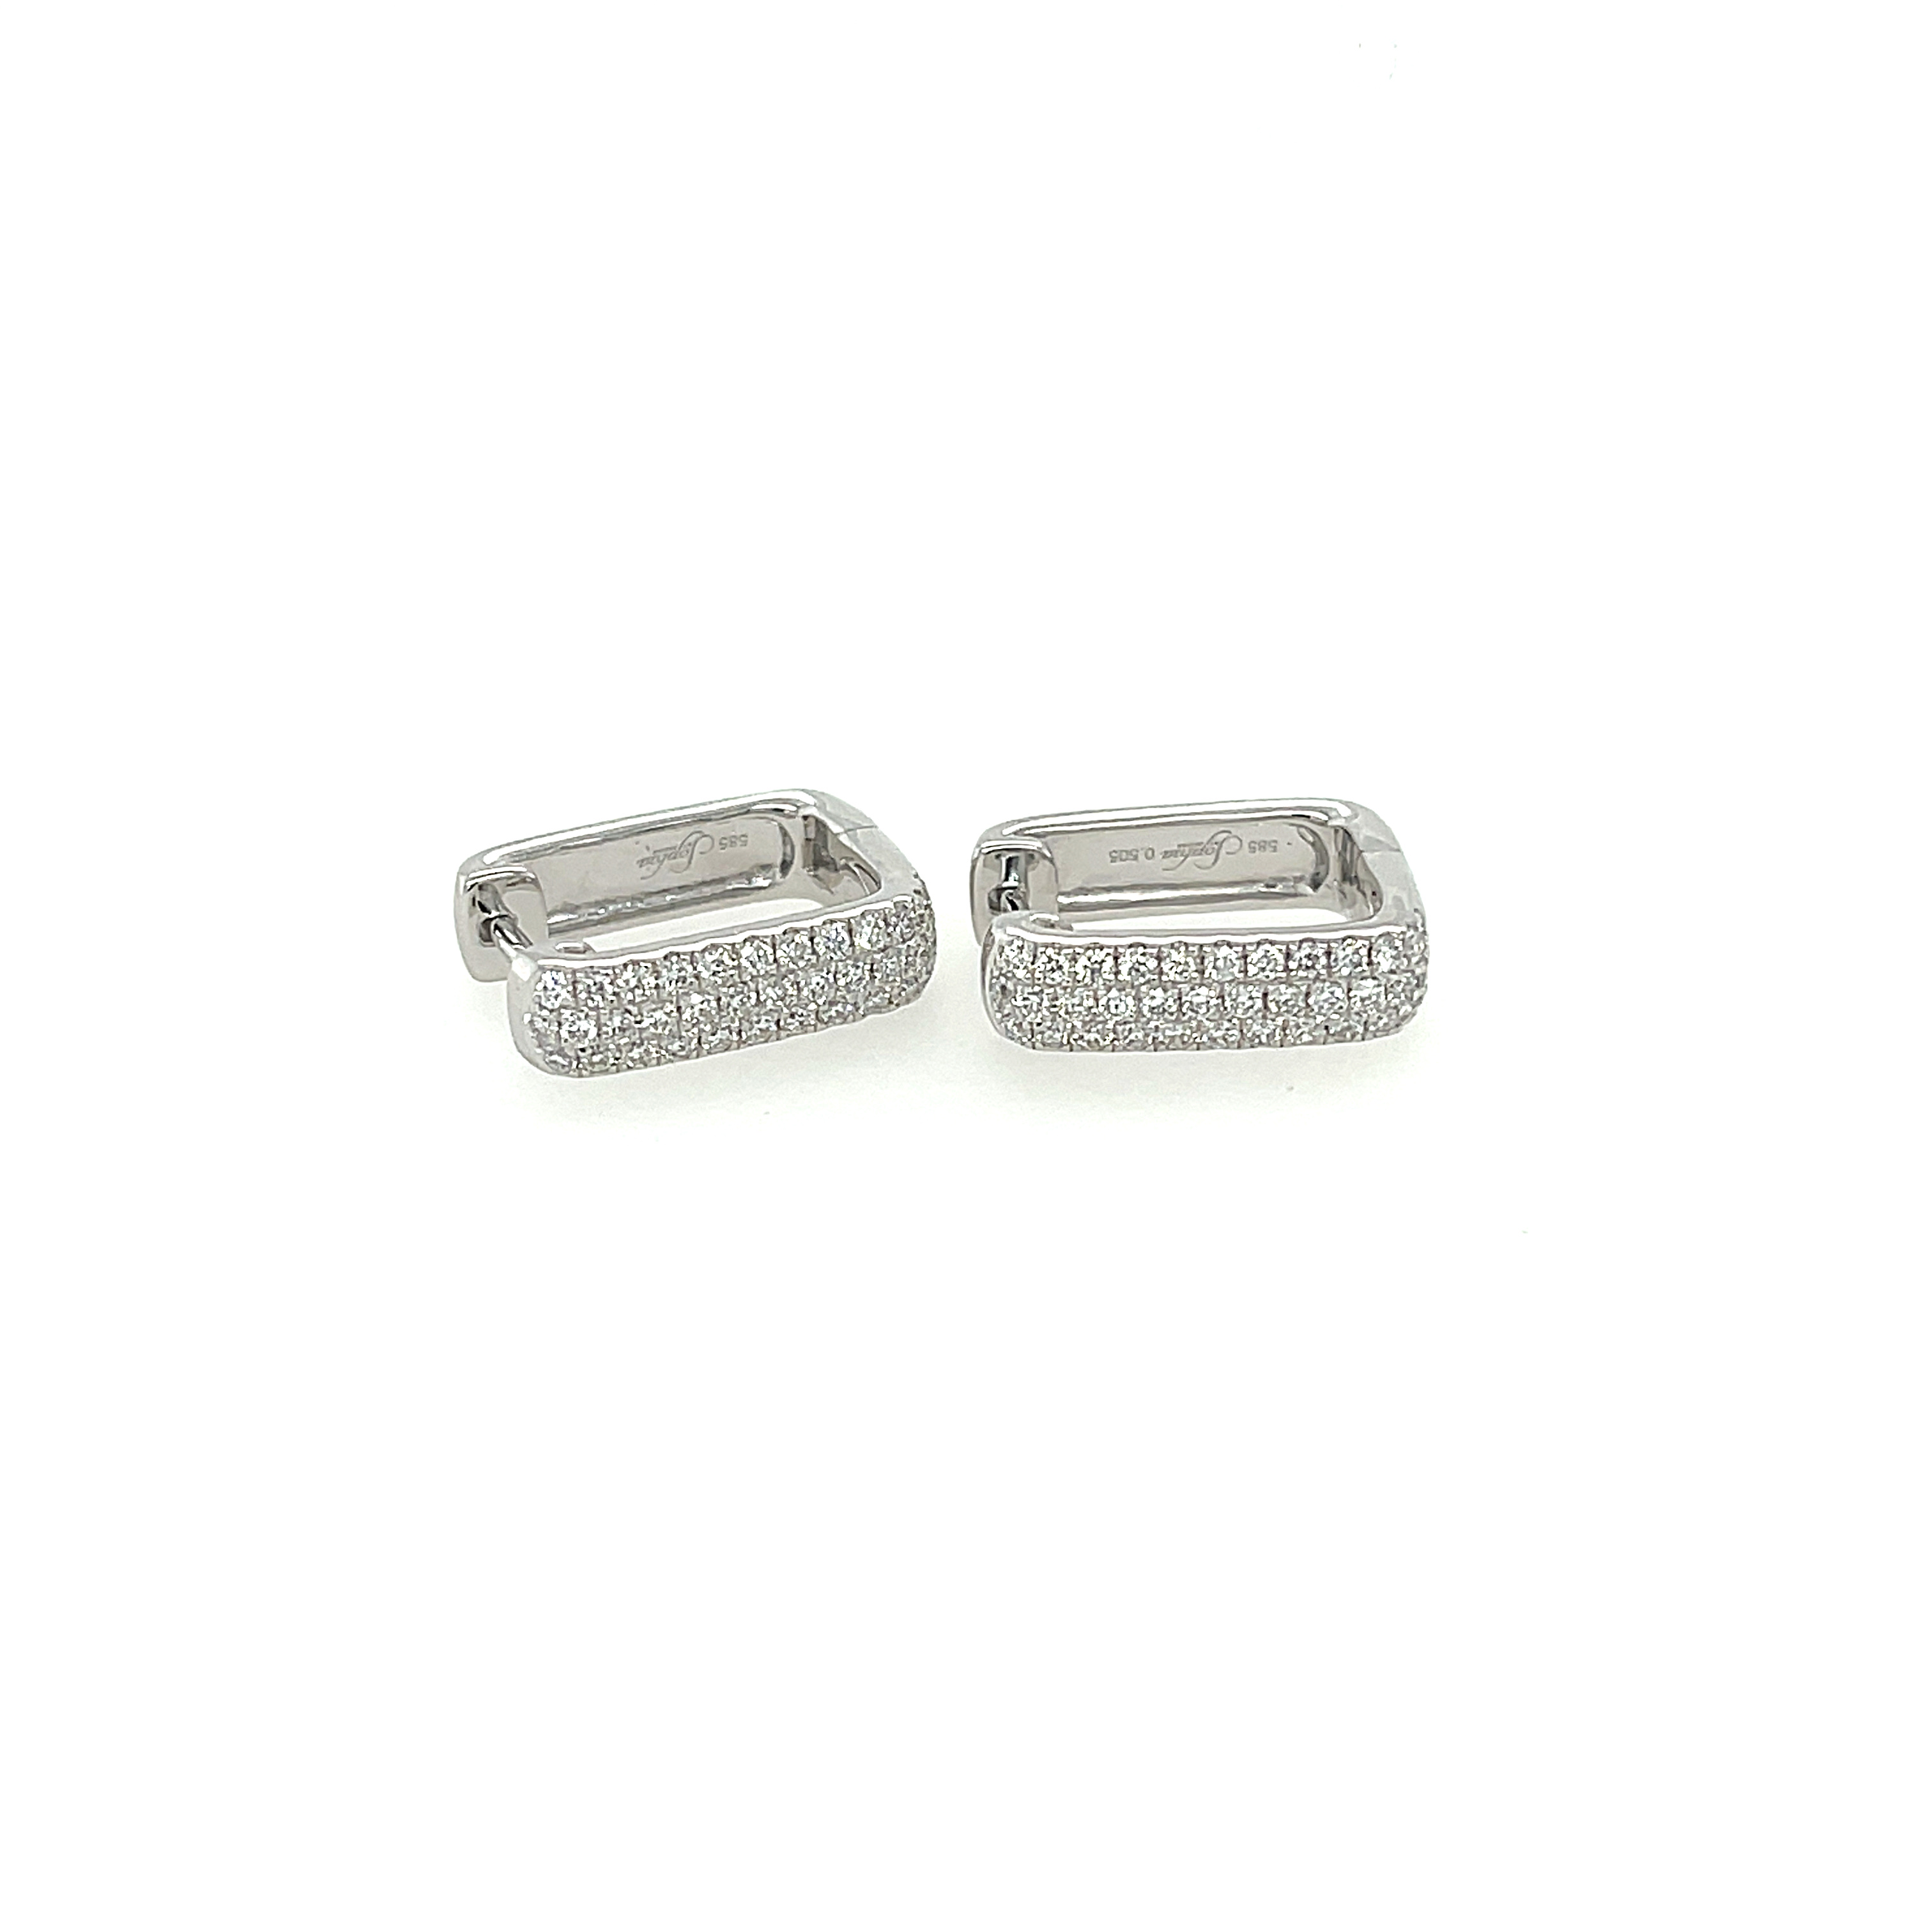 Featured image for “Pavé Diamond White Gold Rectangular Hoops”